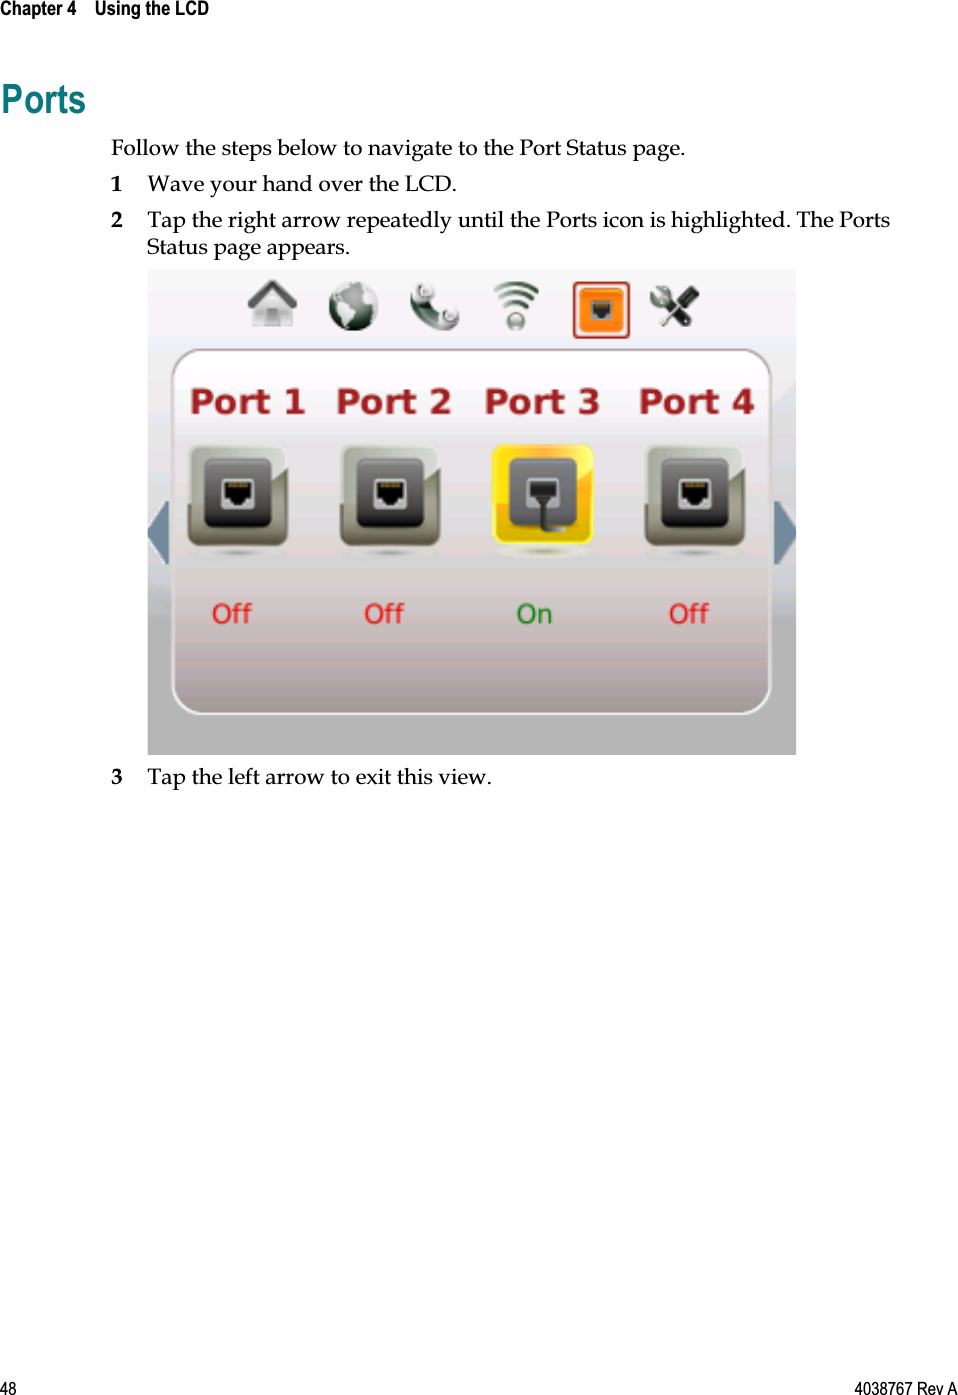  Chapter 4    Using the LCD    48  4038767 Rev A Ports Follow the steps below to navigate to the Port Status page.  1 Wave your hand over the LCD.  2 Tap the right arrow repeatedly until the Ports icon is highlighted. The Ports Status page appears.  3 Tap the left arrow to exit this view.  